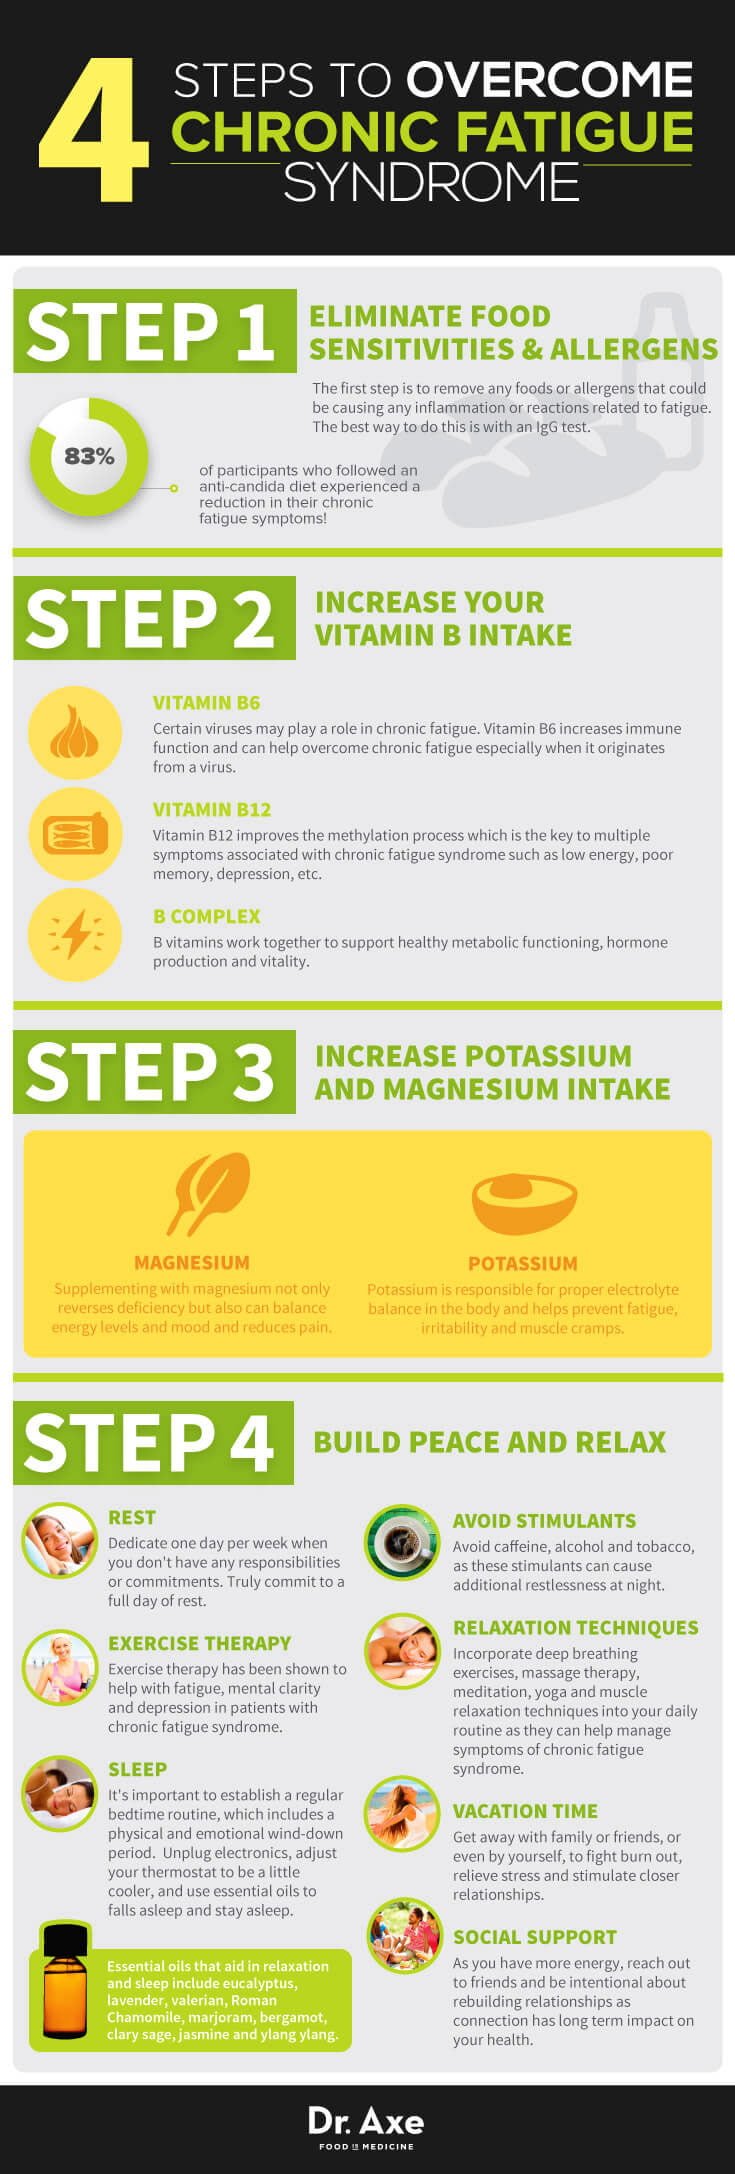 Steps To Overcome Chronic Fatigue Syndrome Infographic